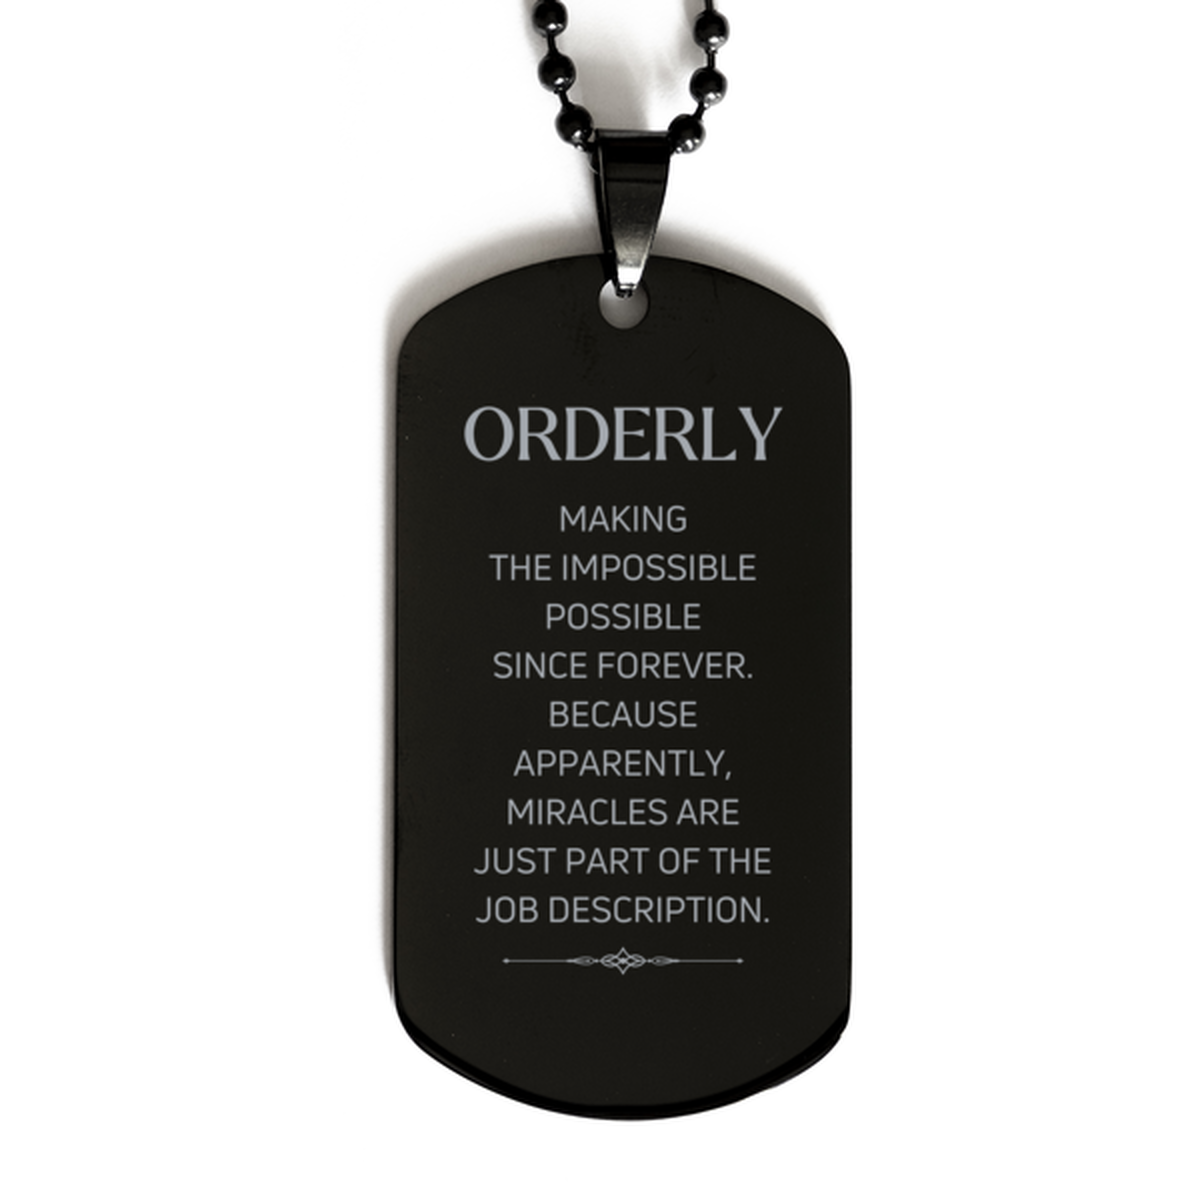 Funny Orderly Gifts, Miracles are just part of the job description, Inspirational Birthday Black Dog Tag For Orderly, Men, Women, Coworkers, Friends, Boss